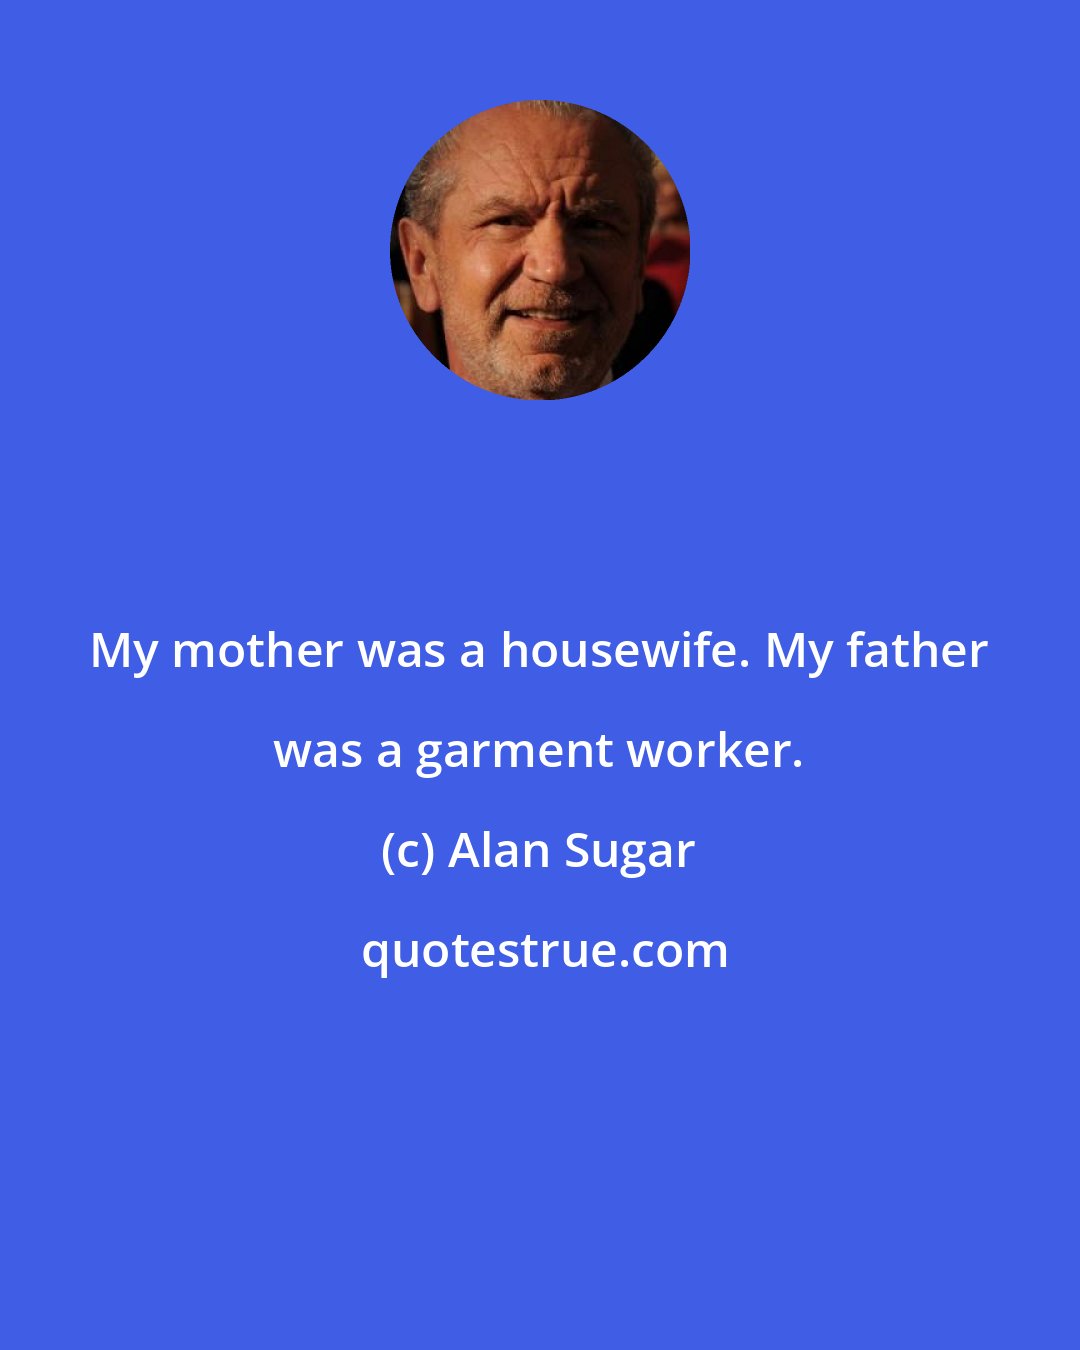 Alan Sugar: My mother was a housewife. My father was a garment worker.